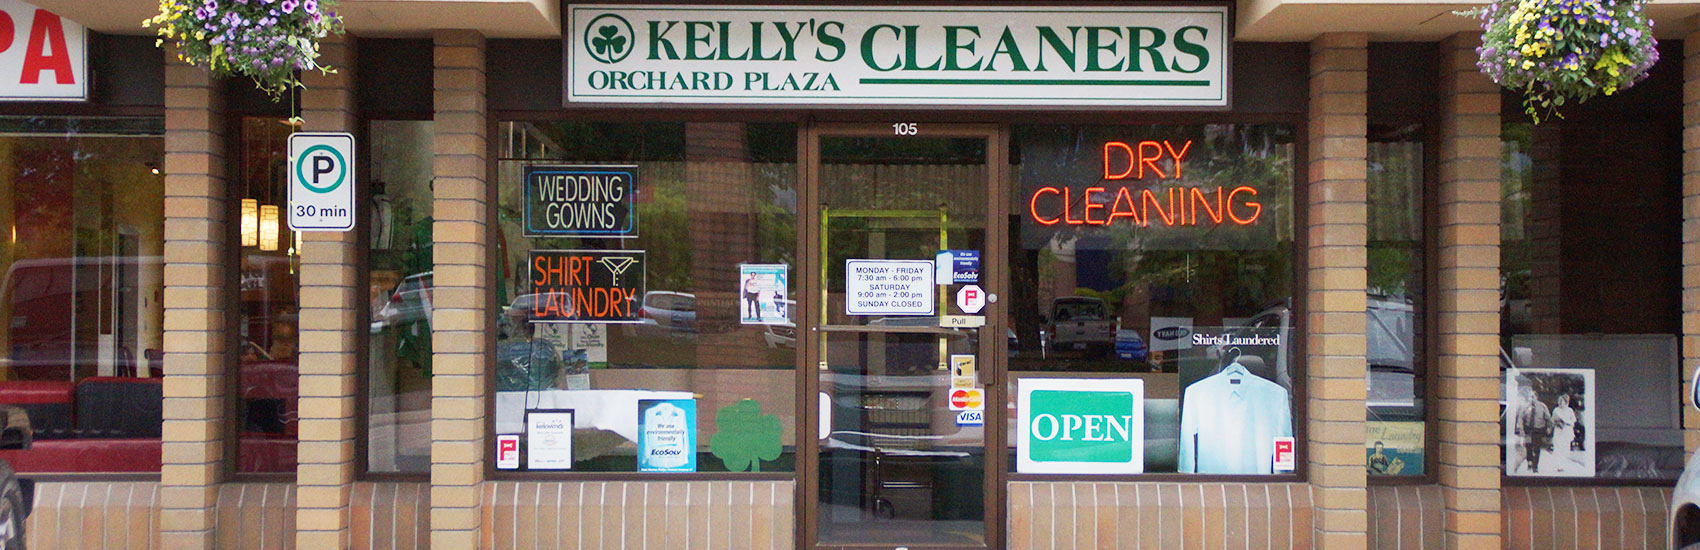 Kelly's cleaners - part of the Eco-Clean group of Kelowna based drycleaners